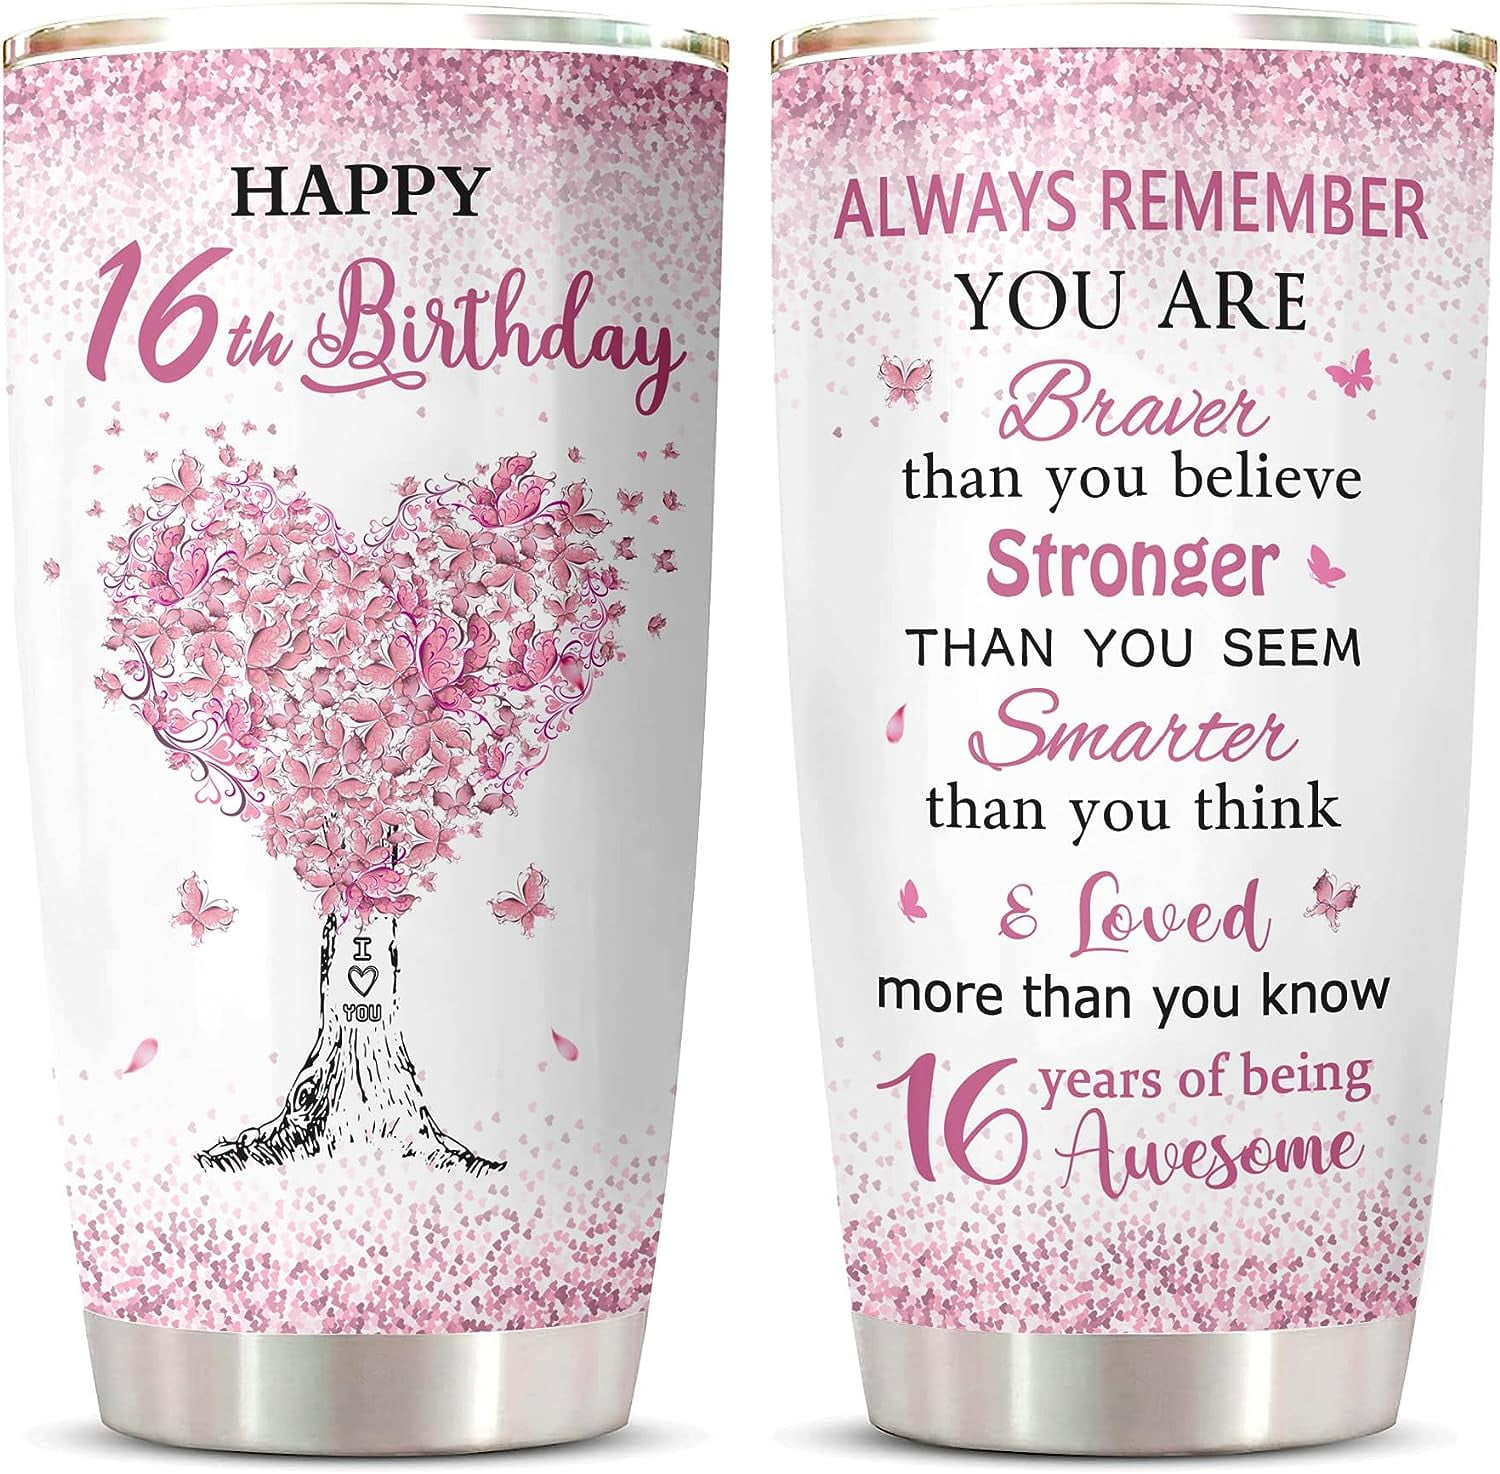 Best 10 Thoughtful Gift Ideas For Girls Birthday Celebration - CakenGifts.in